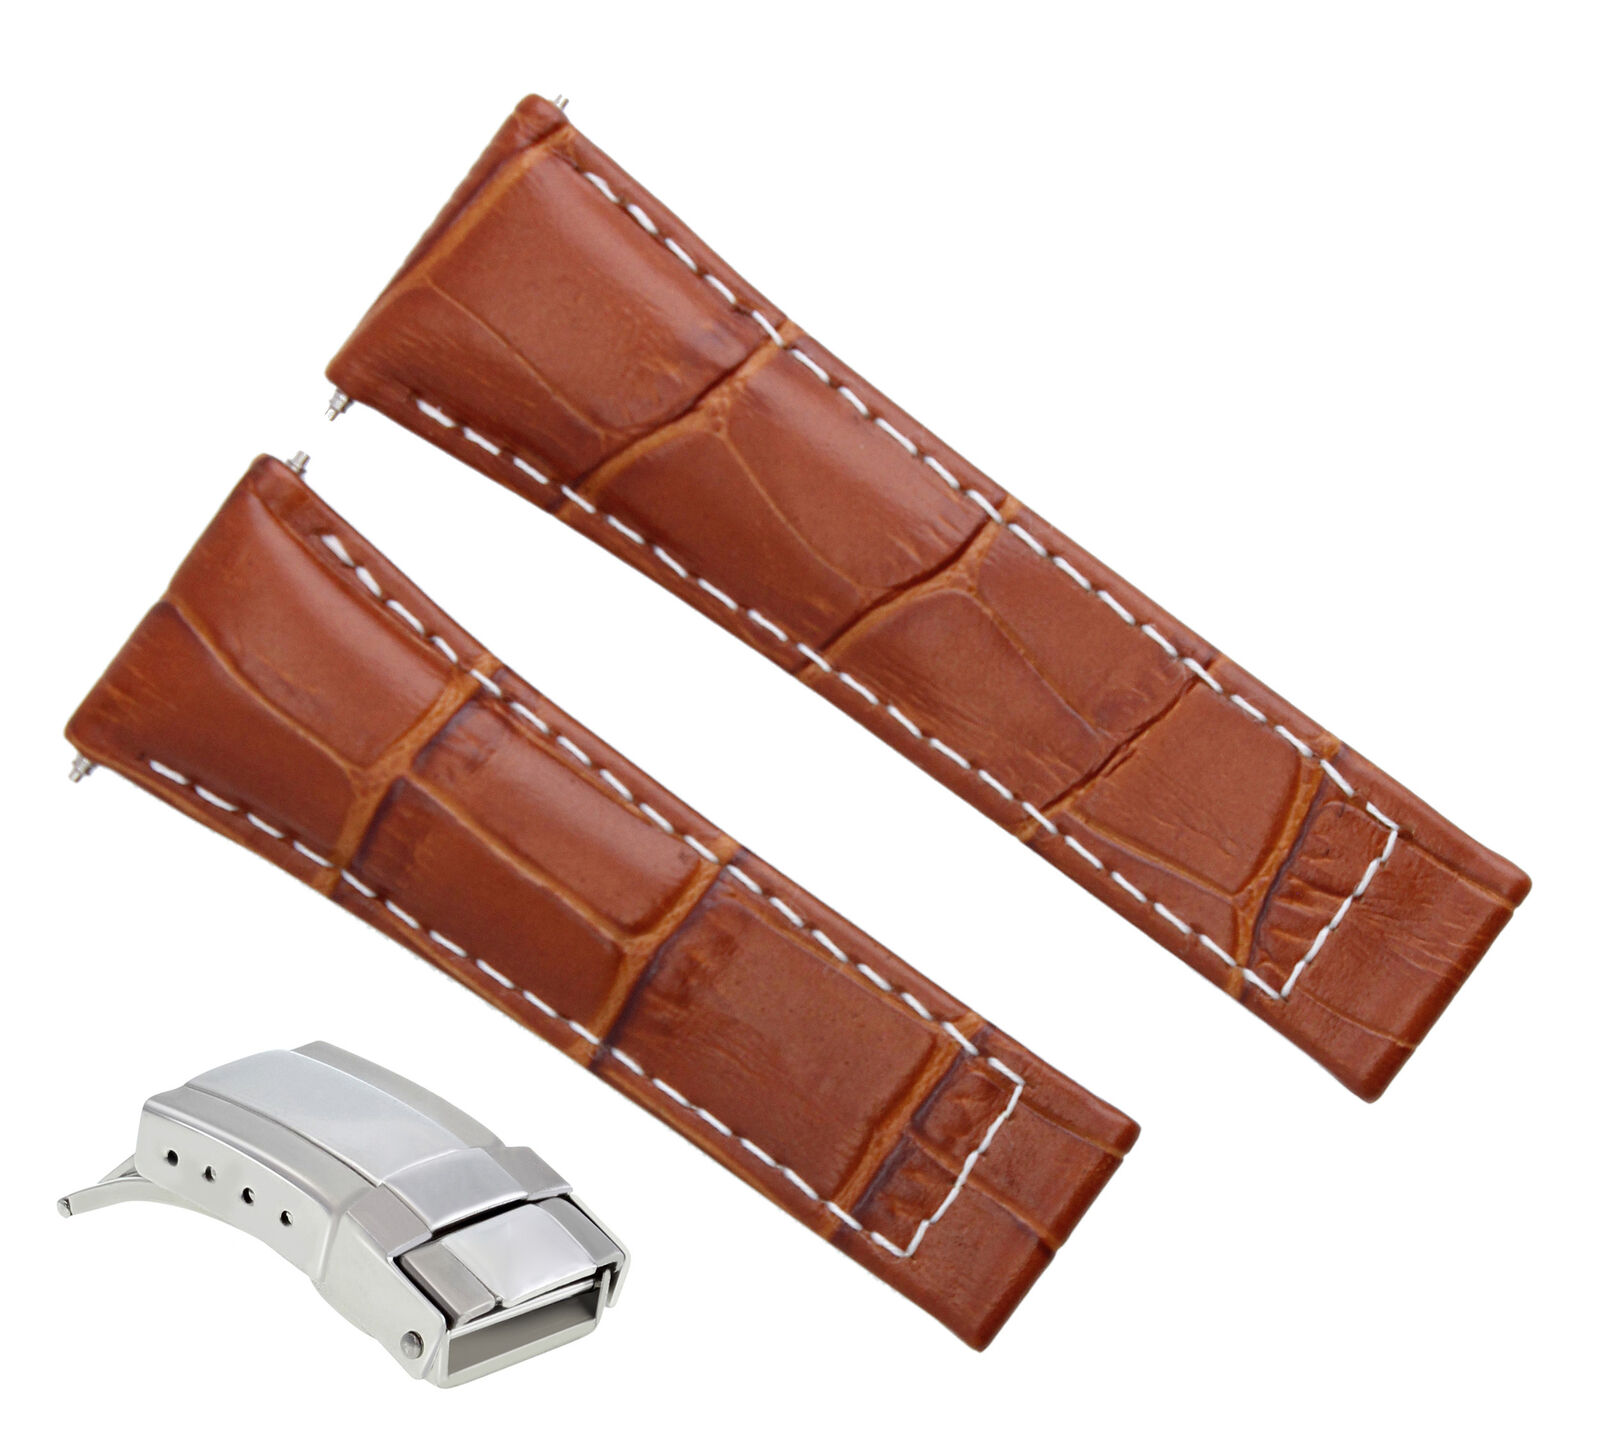 LEATHER STRAP BAND FOR TUDOR CHRONOGRAPH 79260P WATCH TAN WS REGULAR S/S CLASP